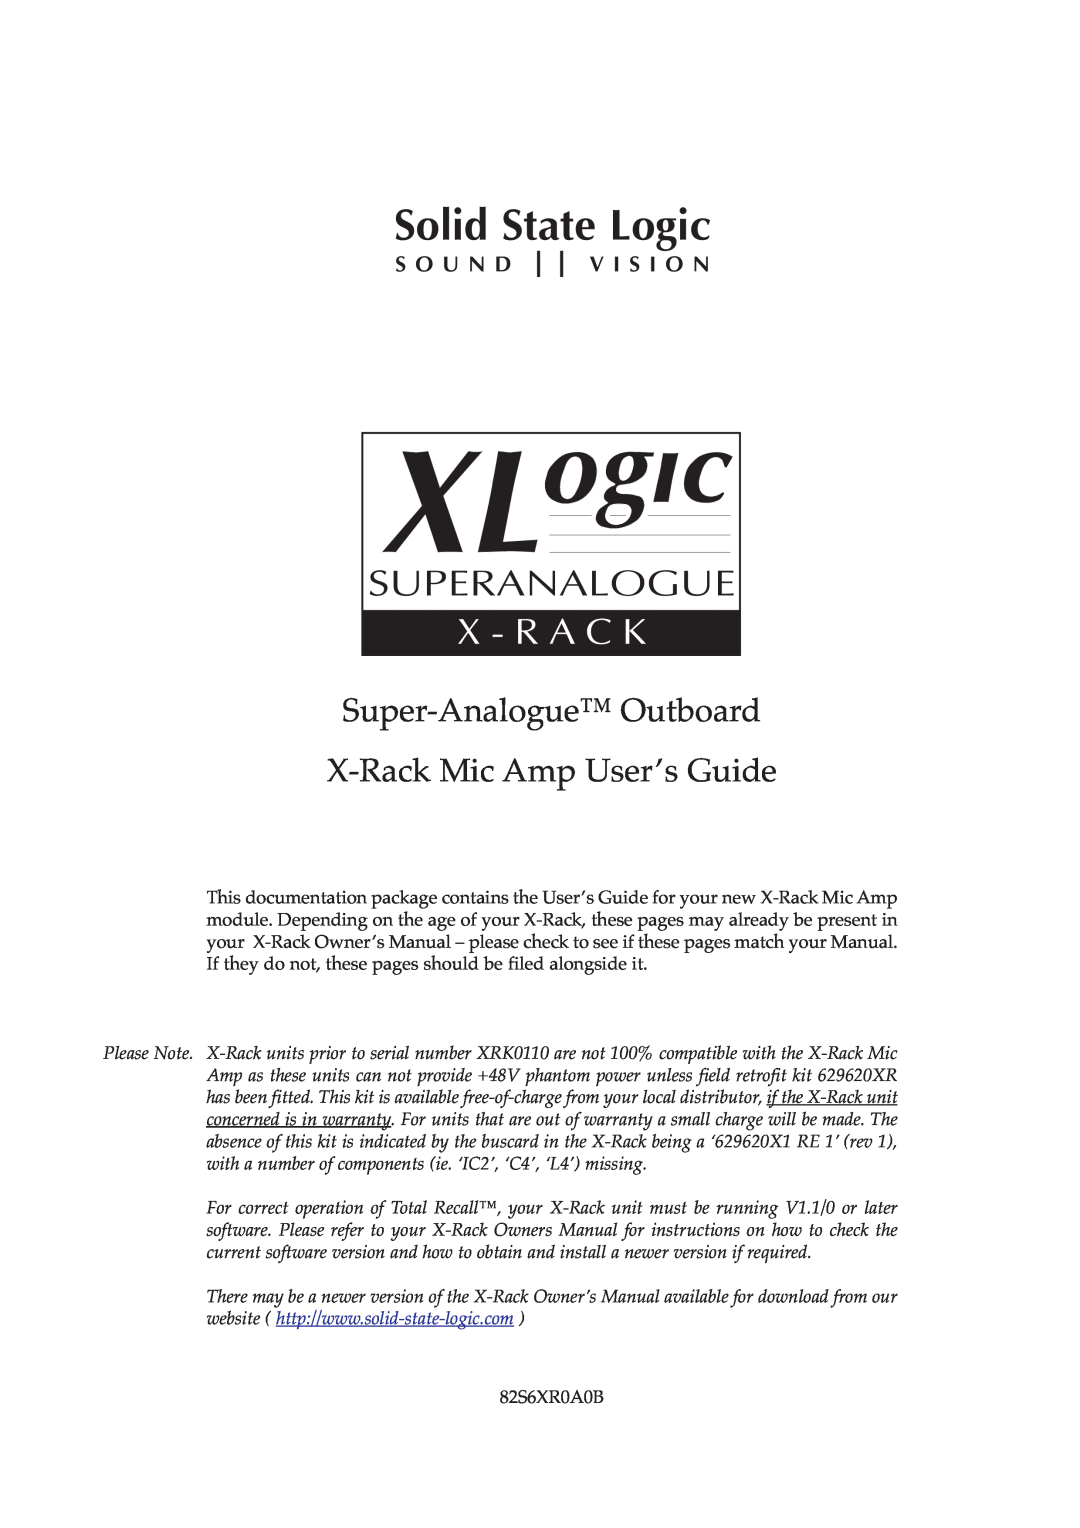 Solid State Logic 82S6XR0A0B owner manual Solid State Logic, Superanalogue, X - R A C K, S O U N D V I S I O N 